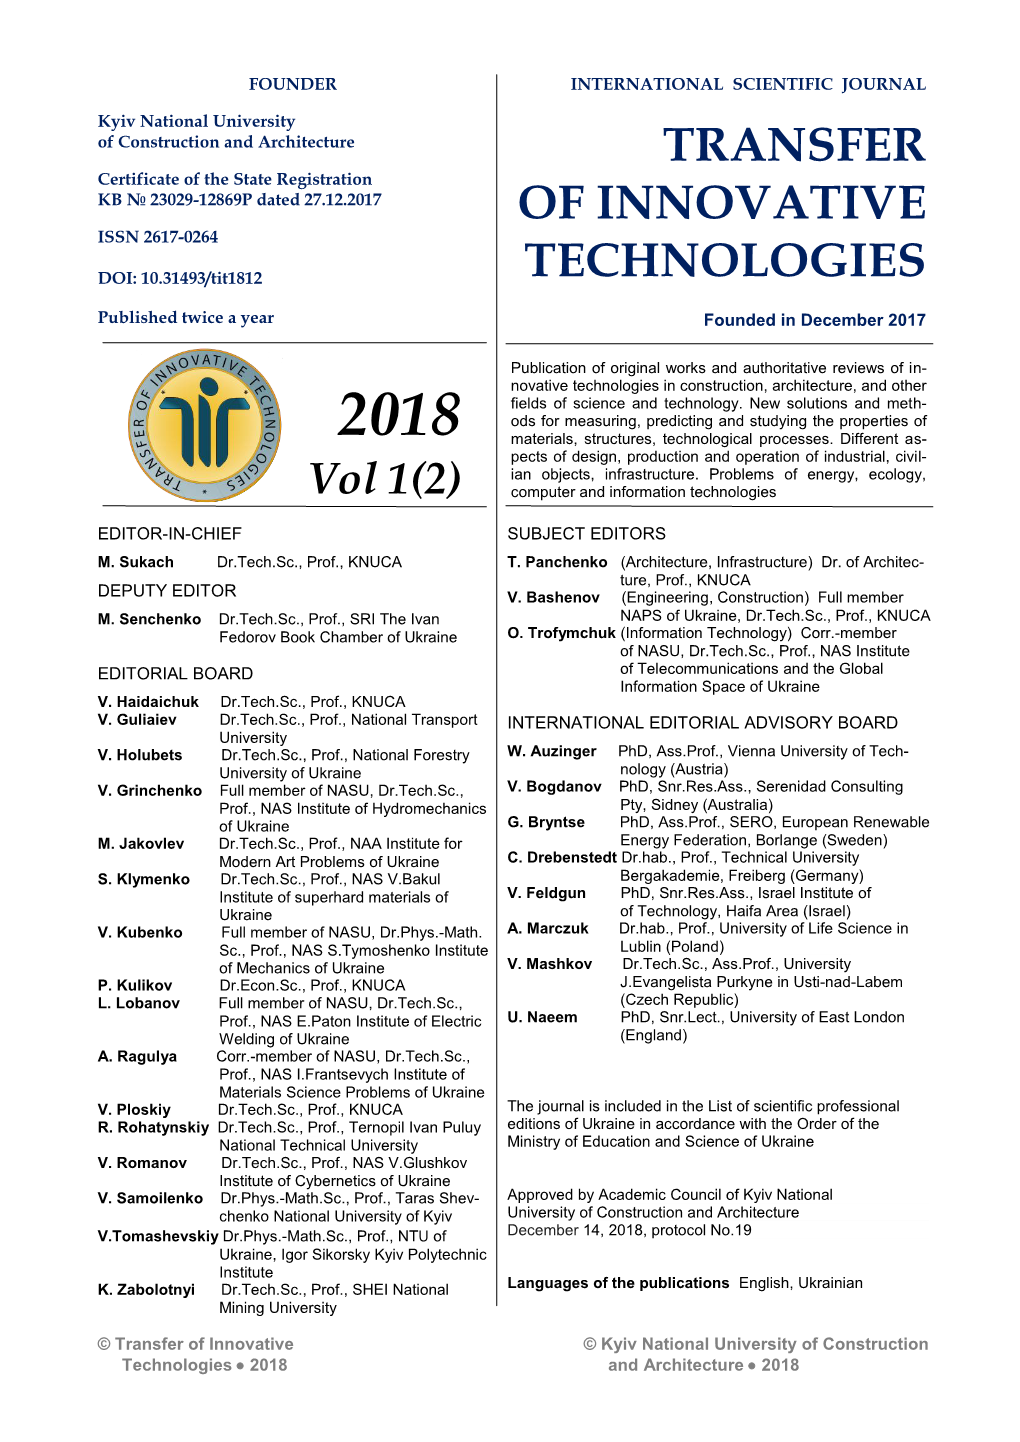 Transfer of Innovative Technologies 3 2018 Vol 1(2), 3-20 Architecture, Infrastructure